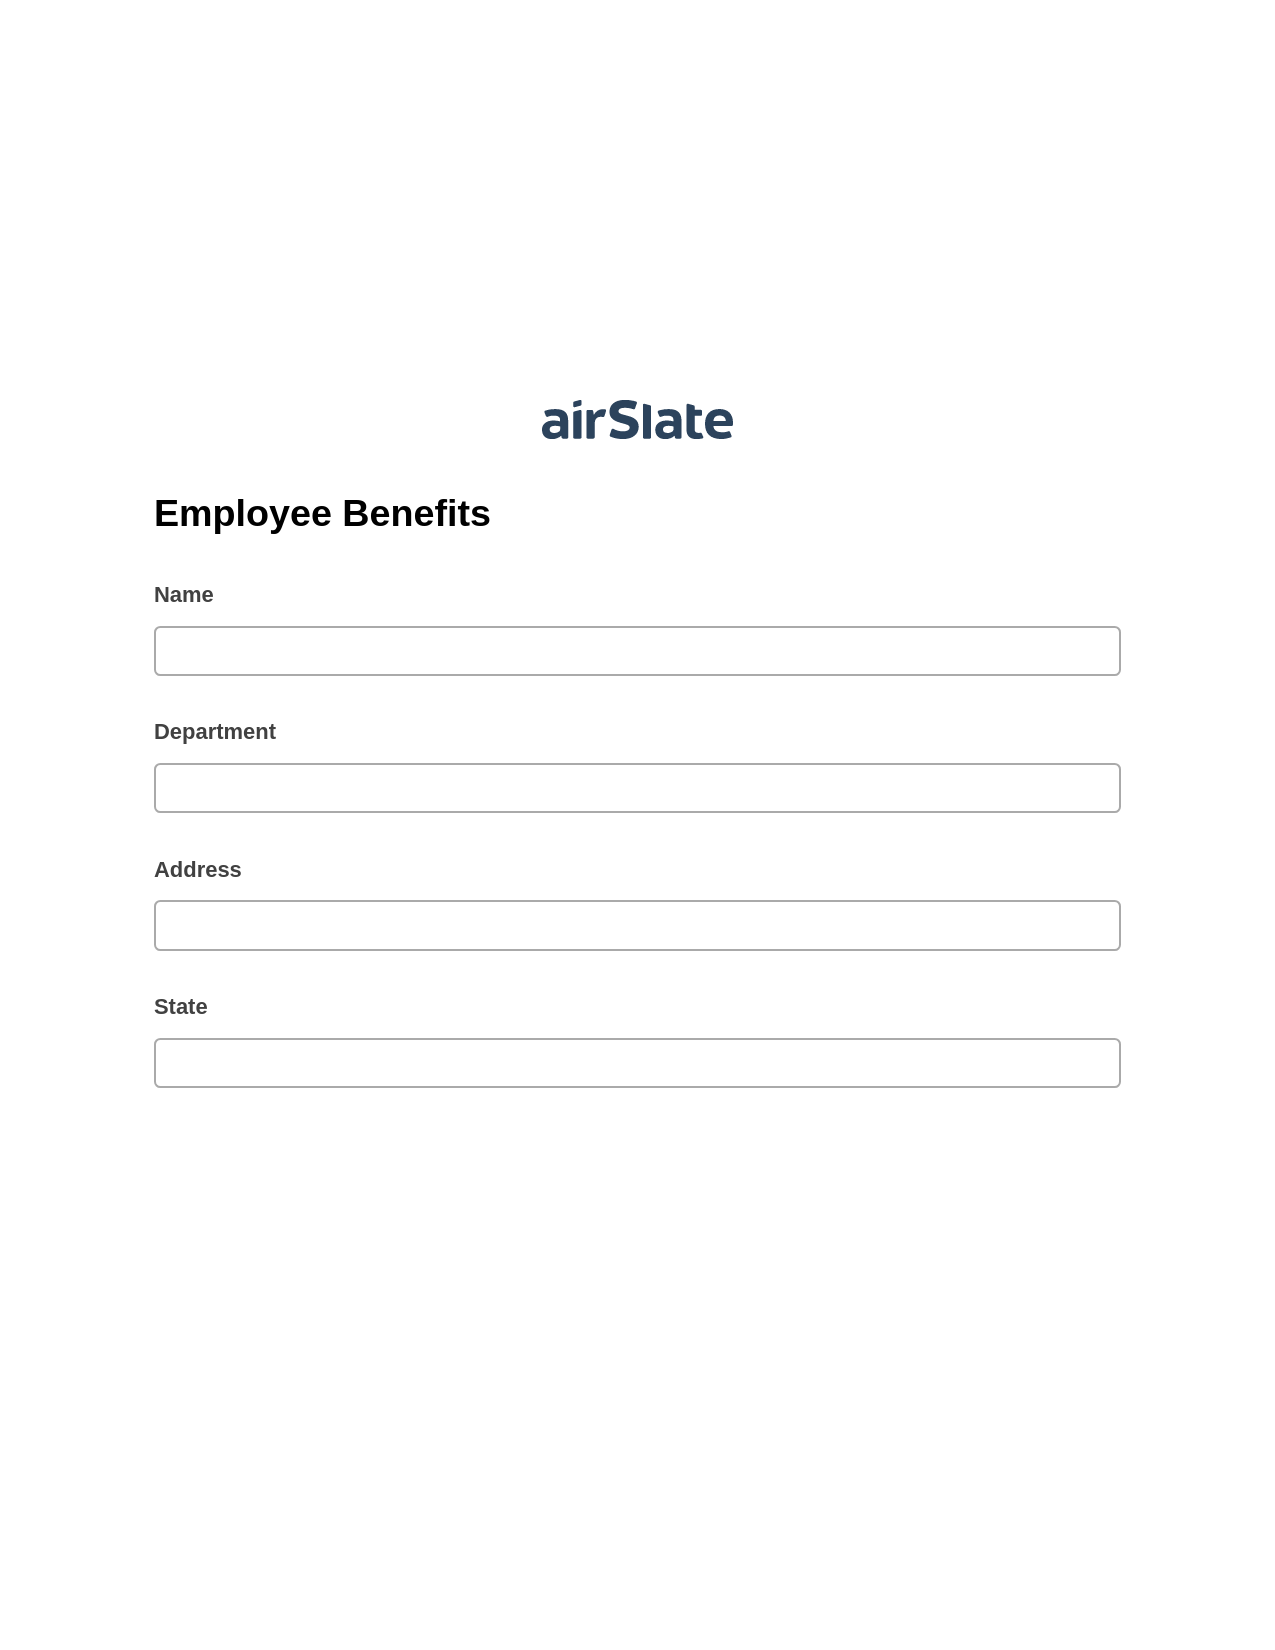 Employee Benefits Pre-fill from NetSuite Records Bot, Create Slate Reminder Bot, Export to Smartsheet